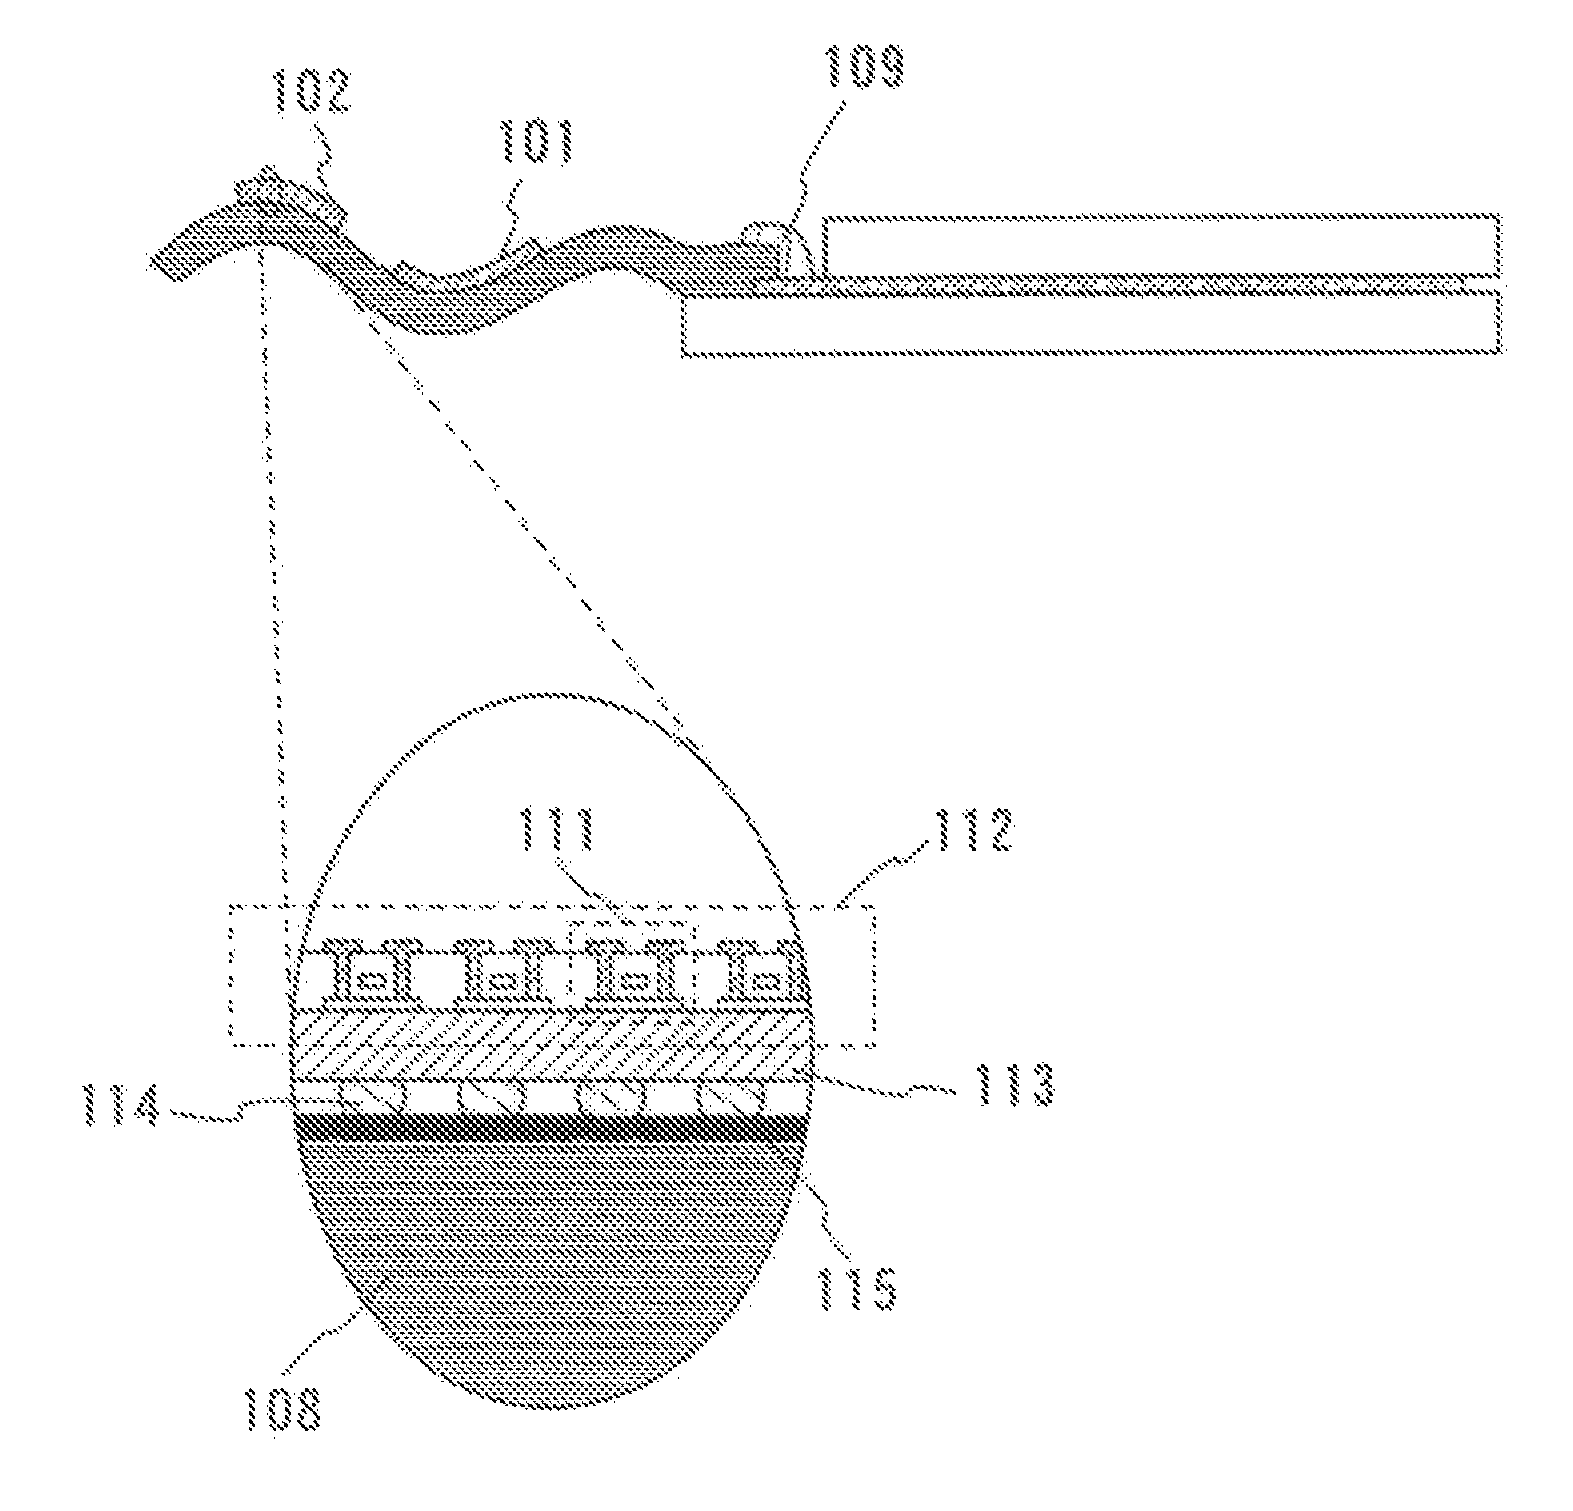 Semiconductor device having a flexible printed circuit